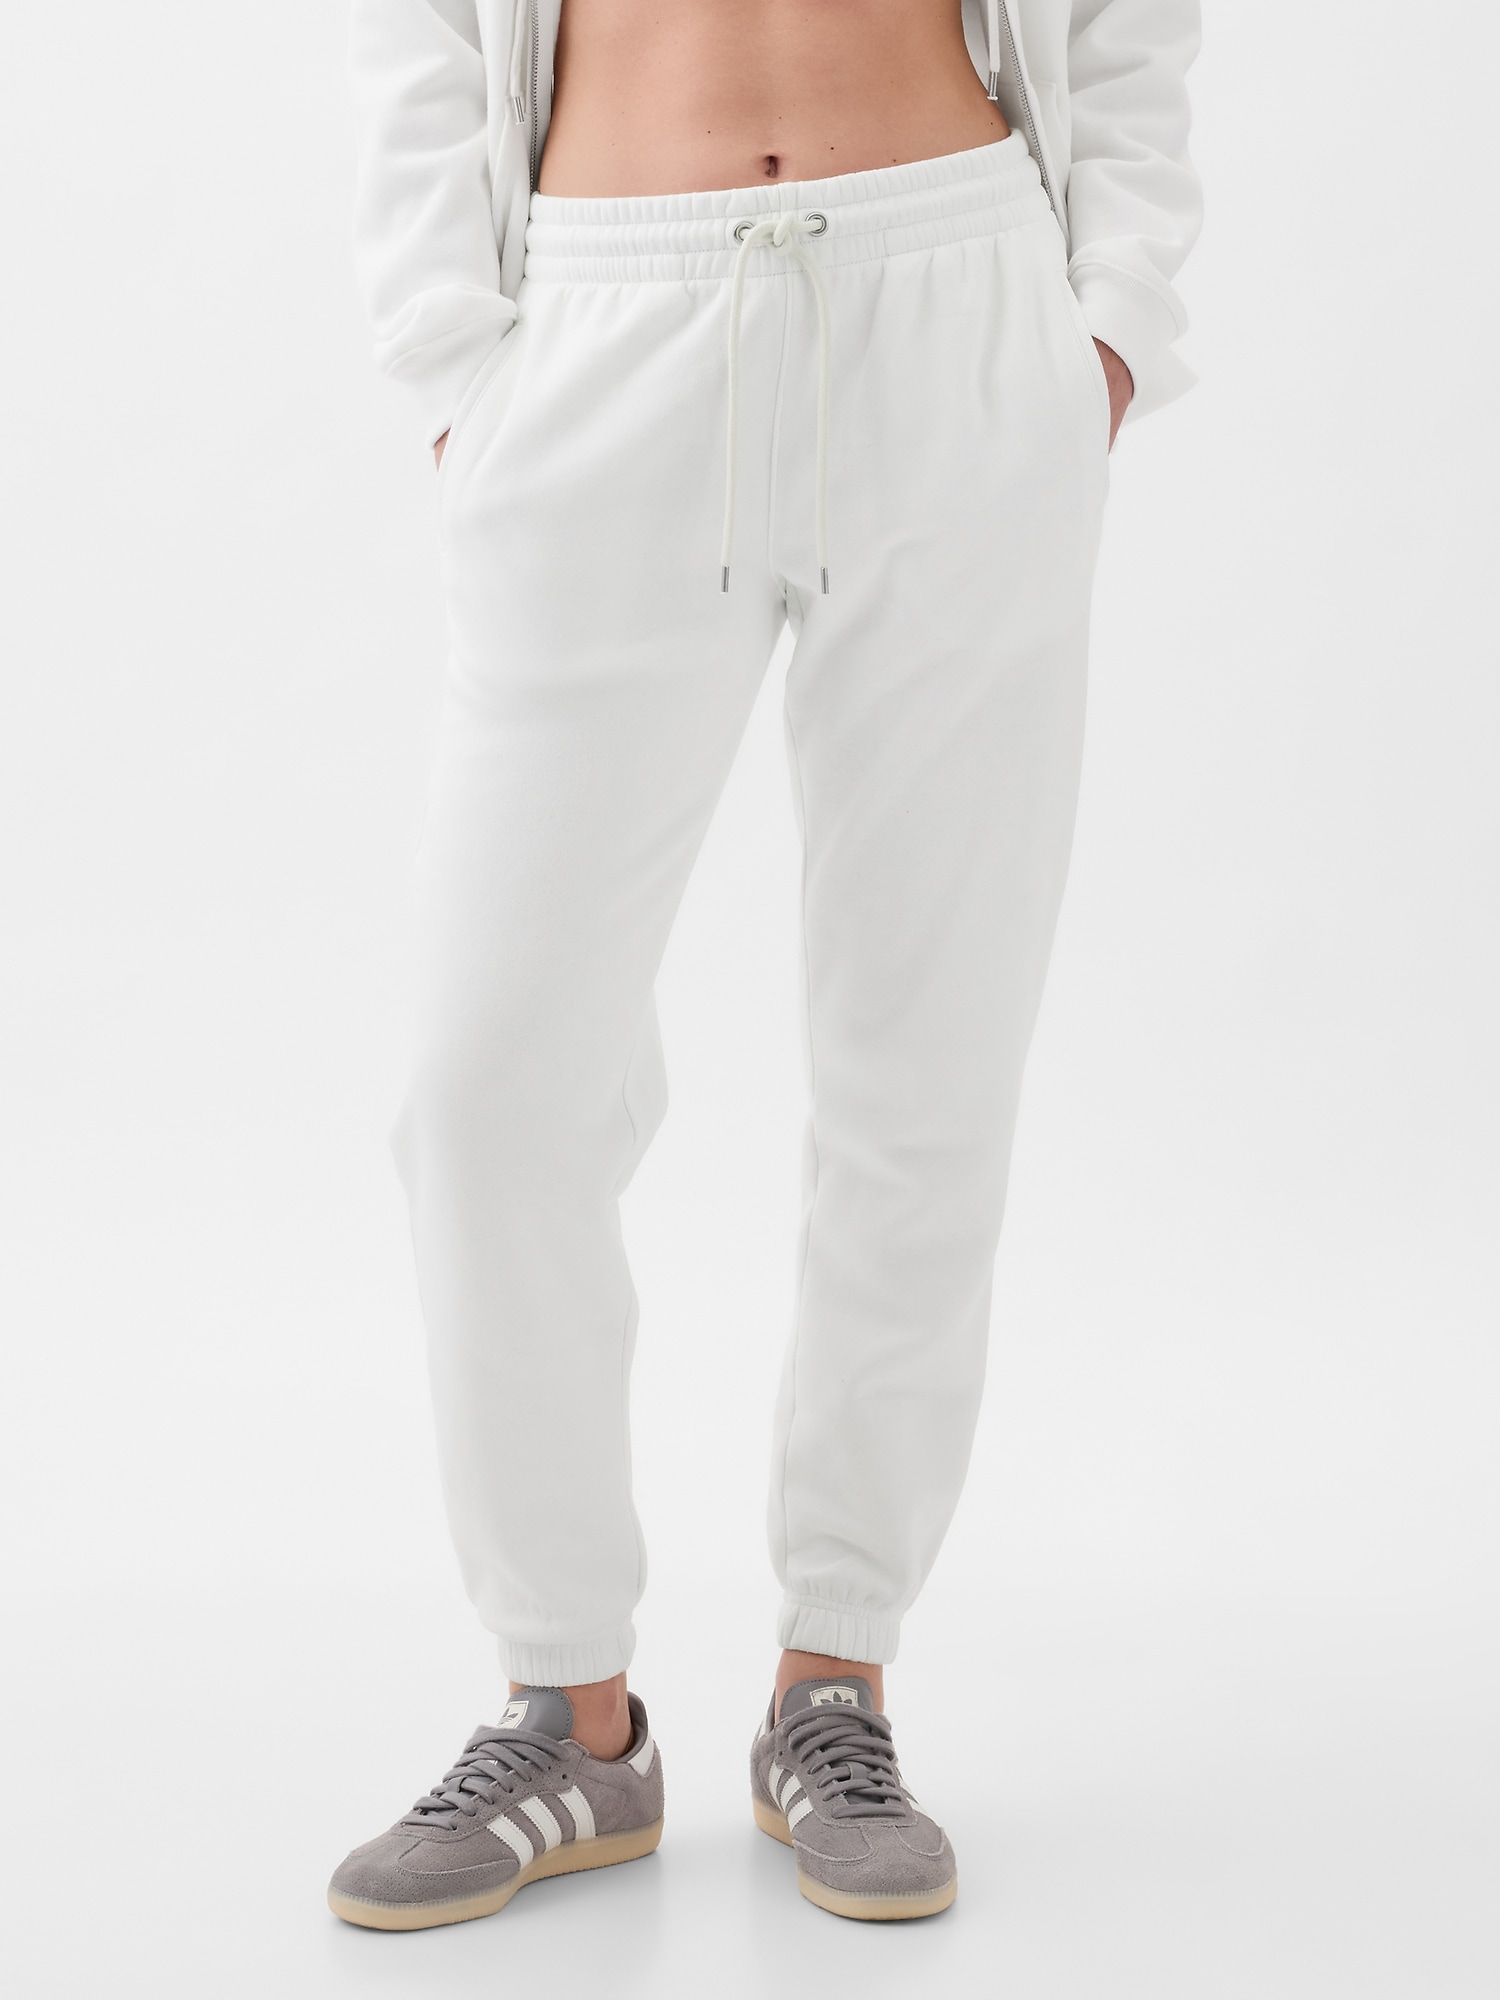 Buy Grey Track Pants for Women by GAP Online